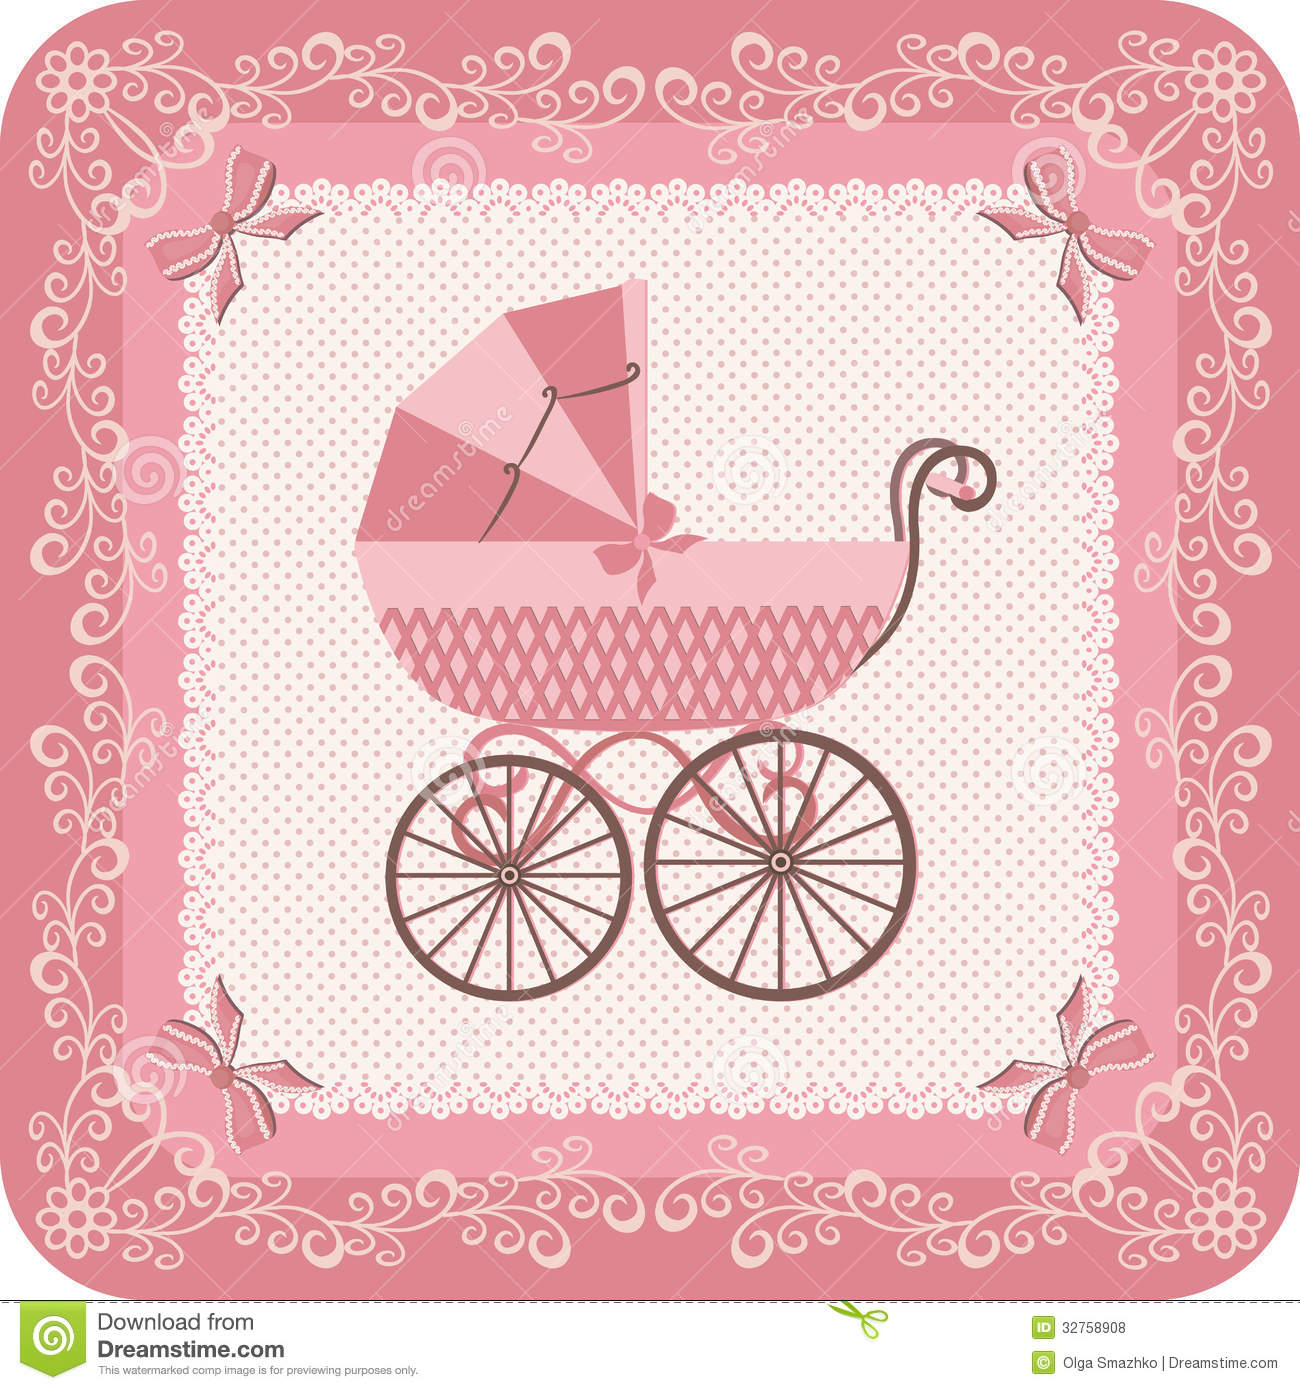 Congratulatory Vintage Postcard For Baby With Pink Carriage